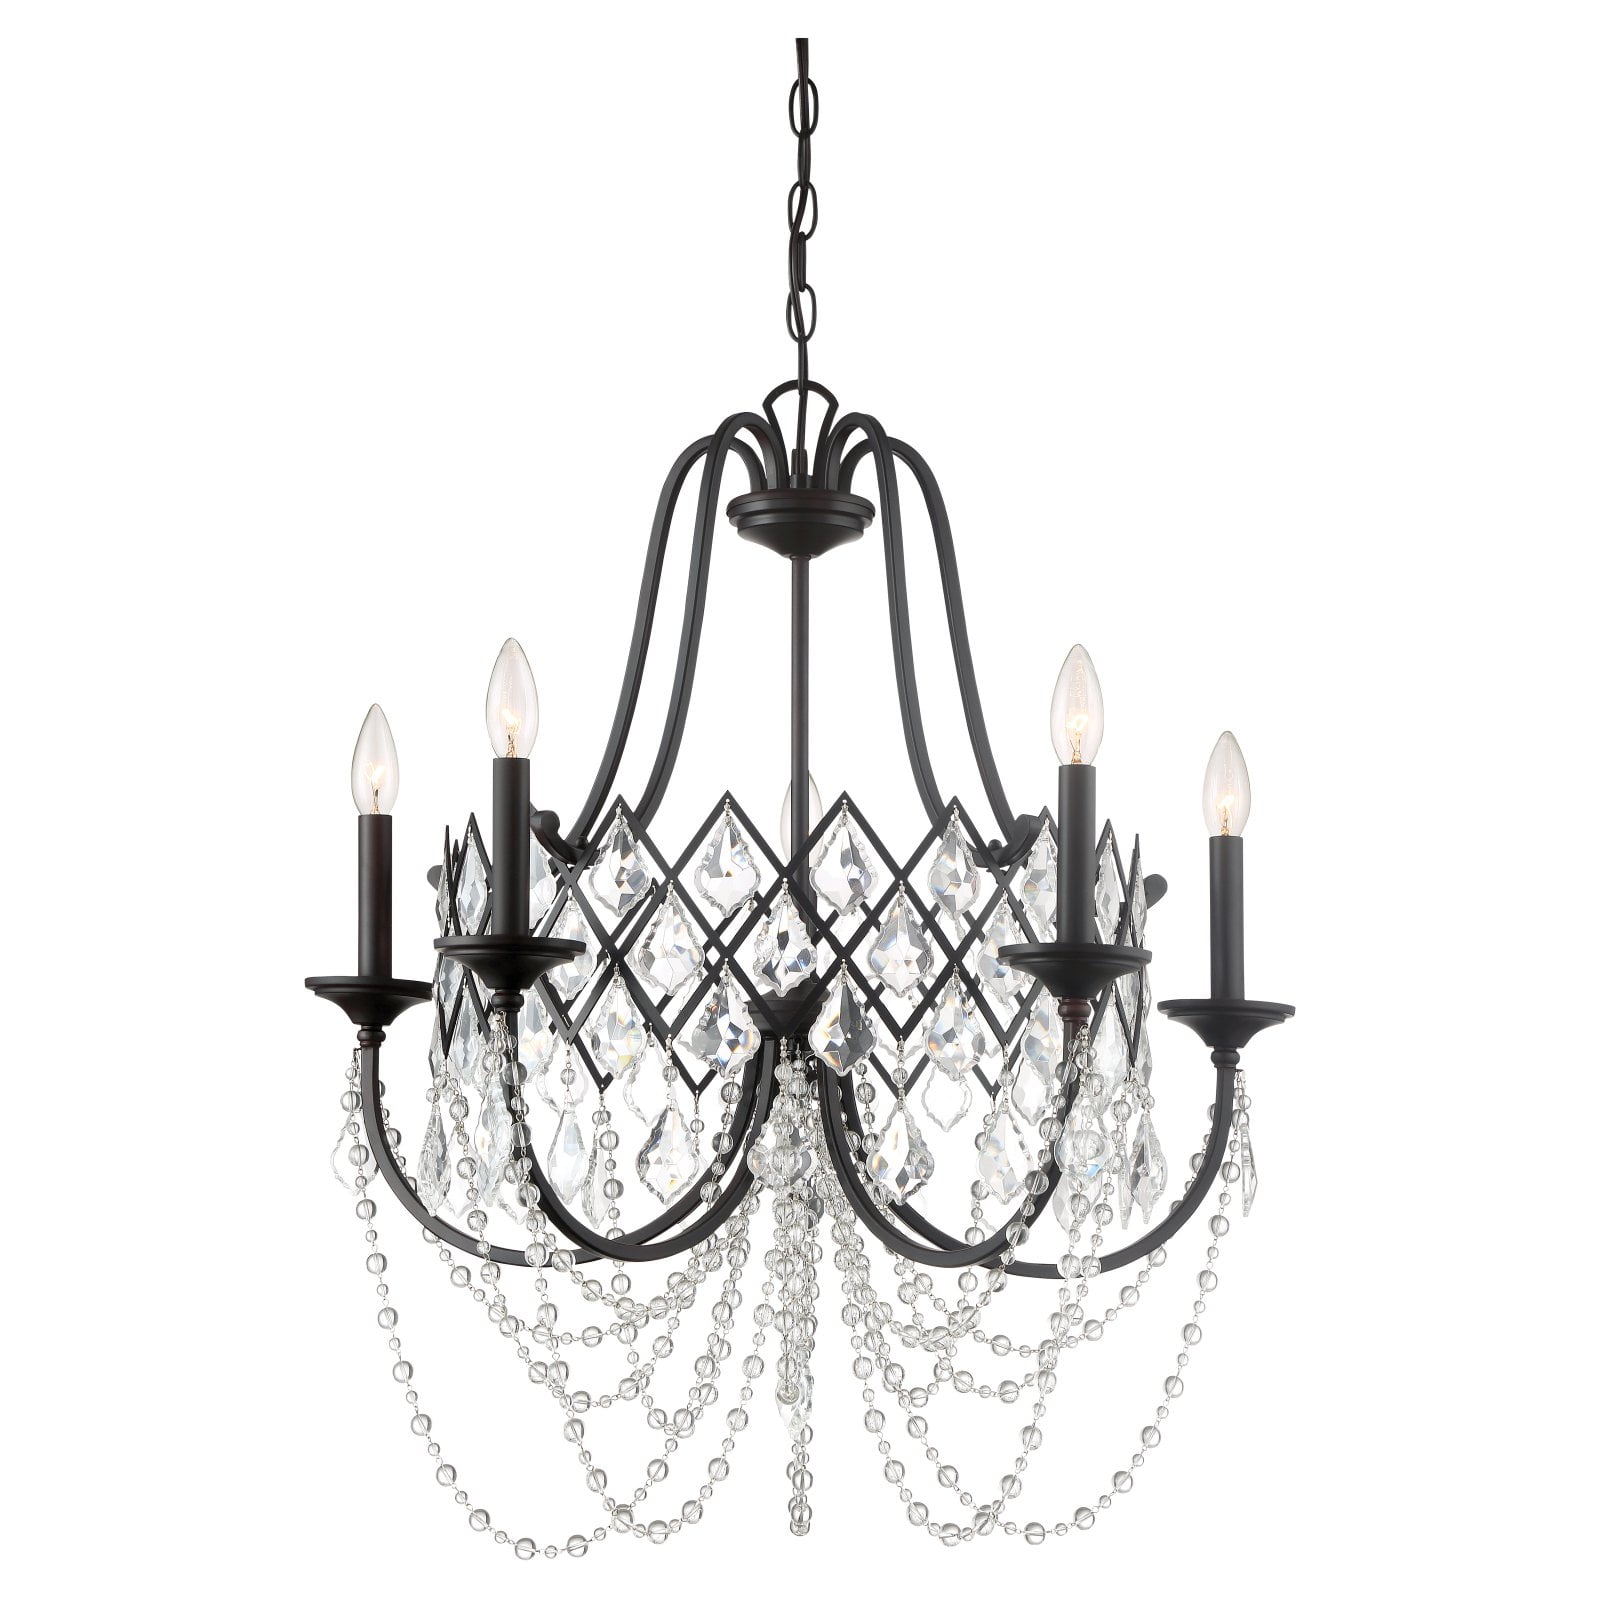 Photo 1 of [STOCK PHOTO FOR REFERENCES]
Designers Fountain Ravina 90385-VB Chandelier